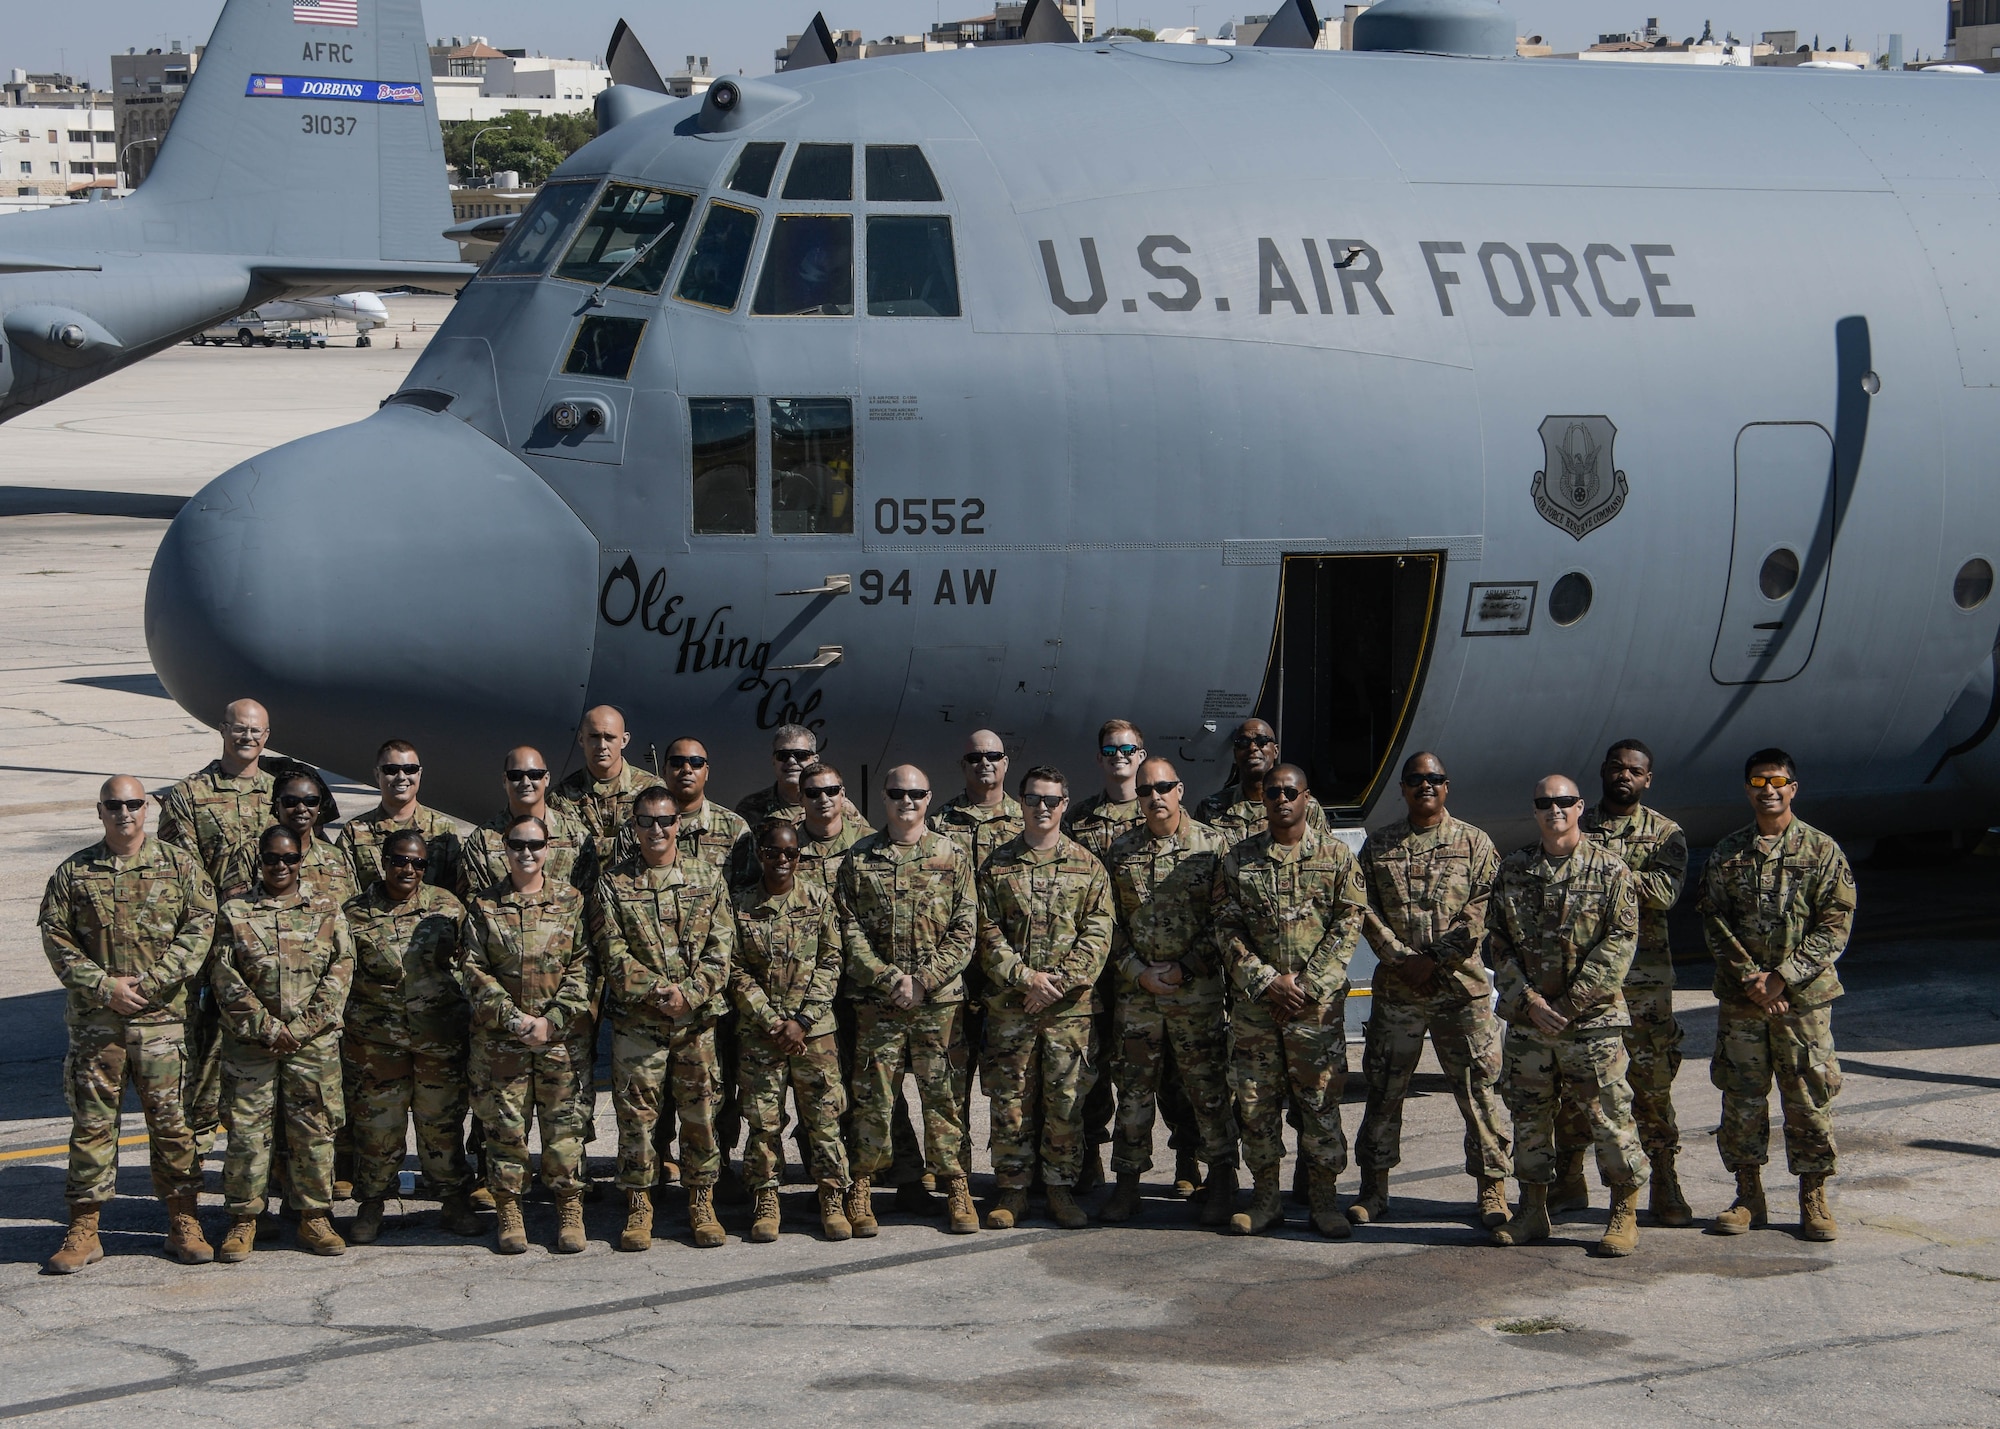 Airmen from Dobbins Air Reserve Base, Georgia, pose for a picture in front of a C-130H on the last day of Exercise Eager Lion in Jordan on Sept. 6, 2019. Eager Lion is a multi-national exercise where Dobbins Air Reserve Base is the primary provider of air support. (U.S. Air Force photo by Senior Airman Josh Kincaid)